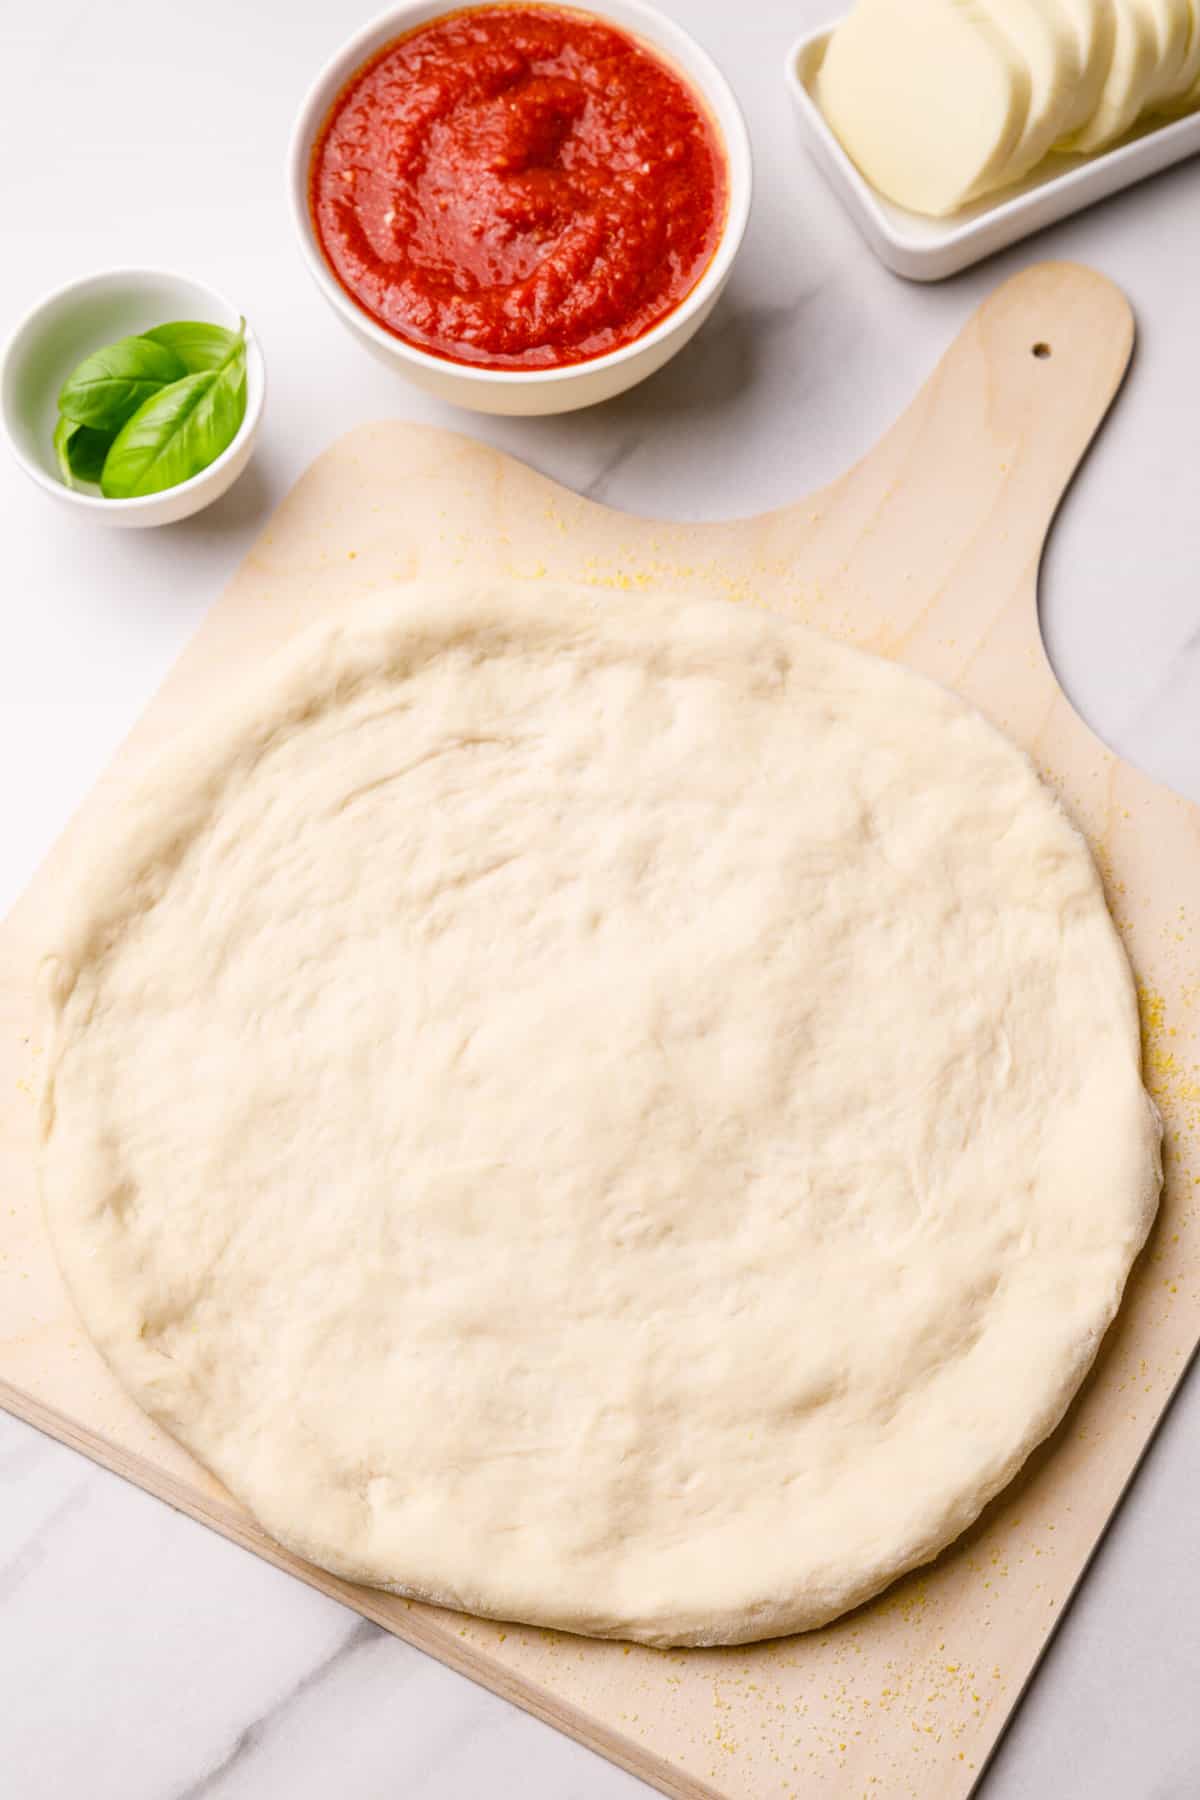 formed pizza dough in a shape of a crust sitting on wooden pizza platter